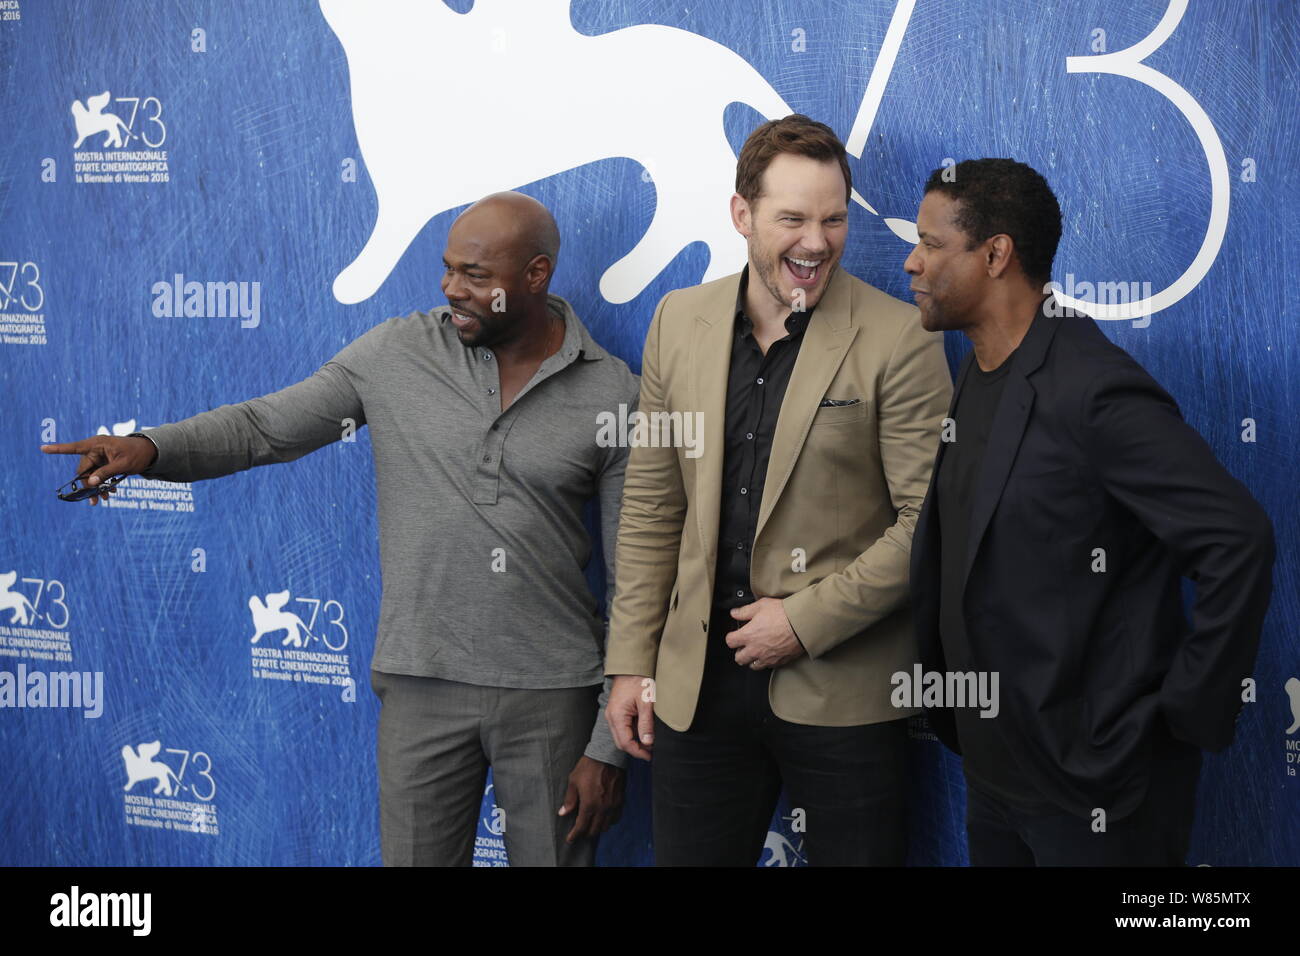 (From let) American actor Denzel Washington, actors Chris Pratt and Antoine Fuqua attend a press conference for their movie "The Magnificent Seven" du Stock Photo